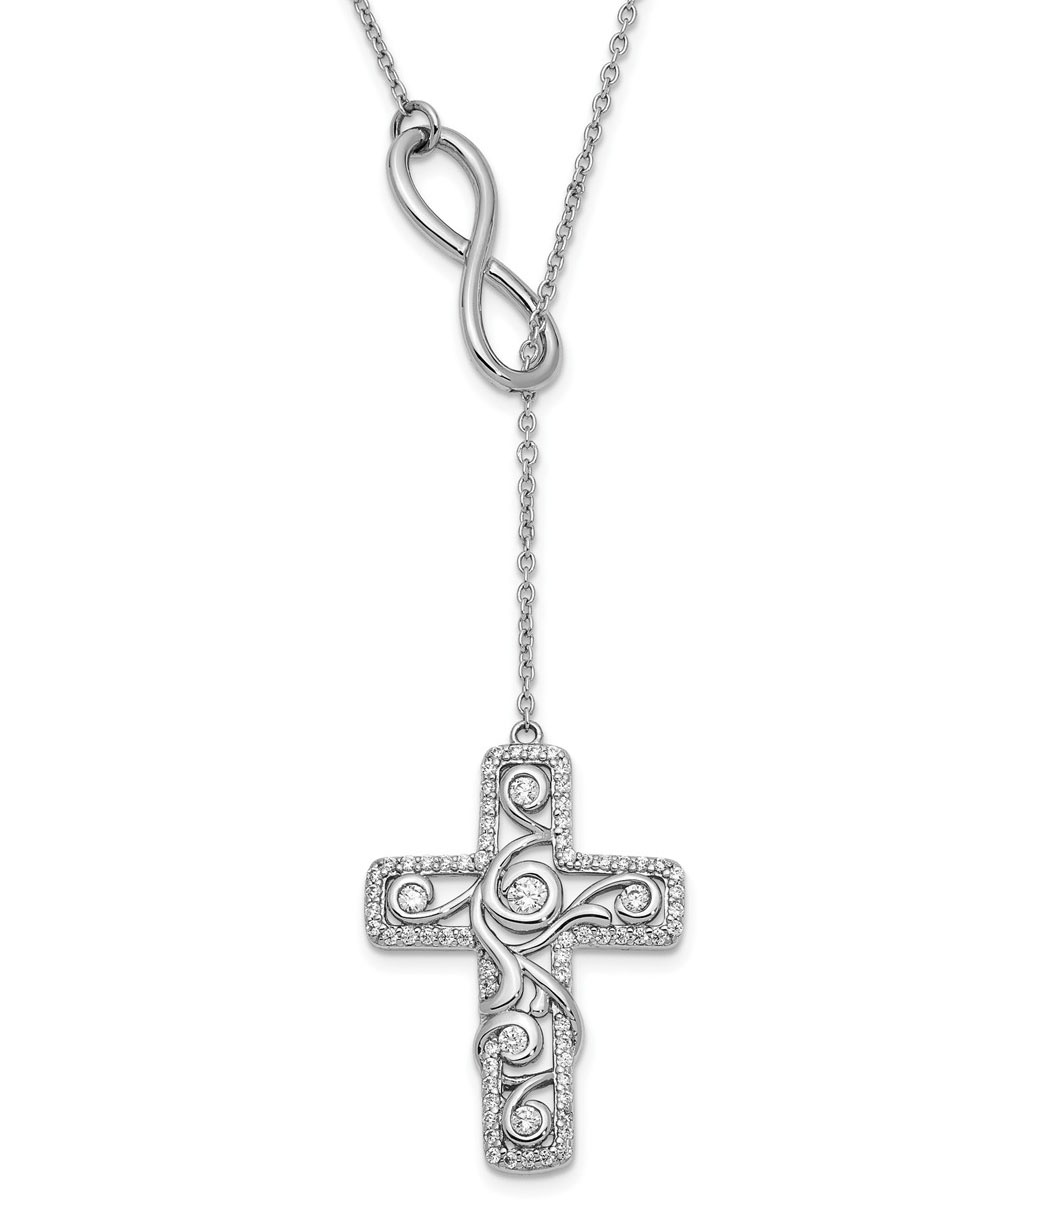 'Eternity Lariat' CZ Cross Pendant Necklace, Rhodium-Plated Sterling Silver.